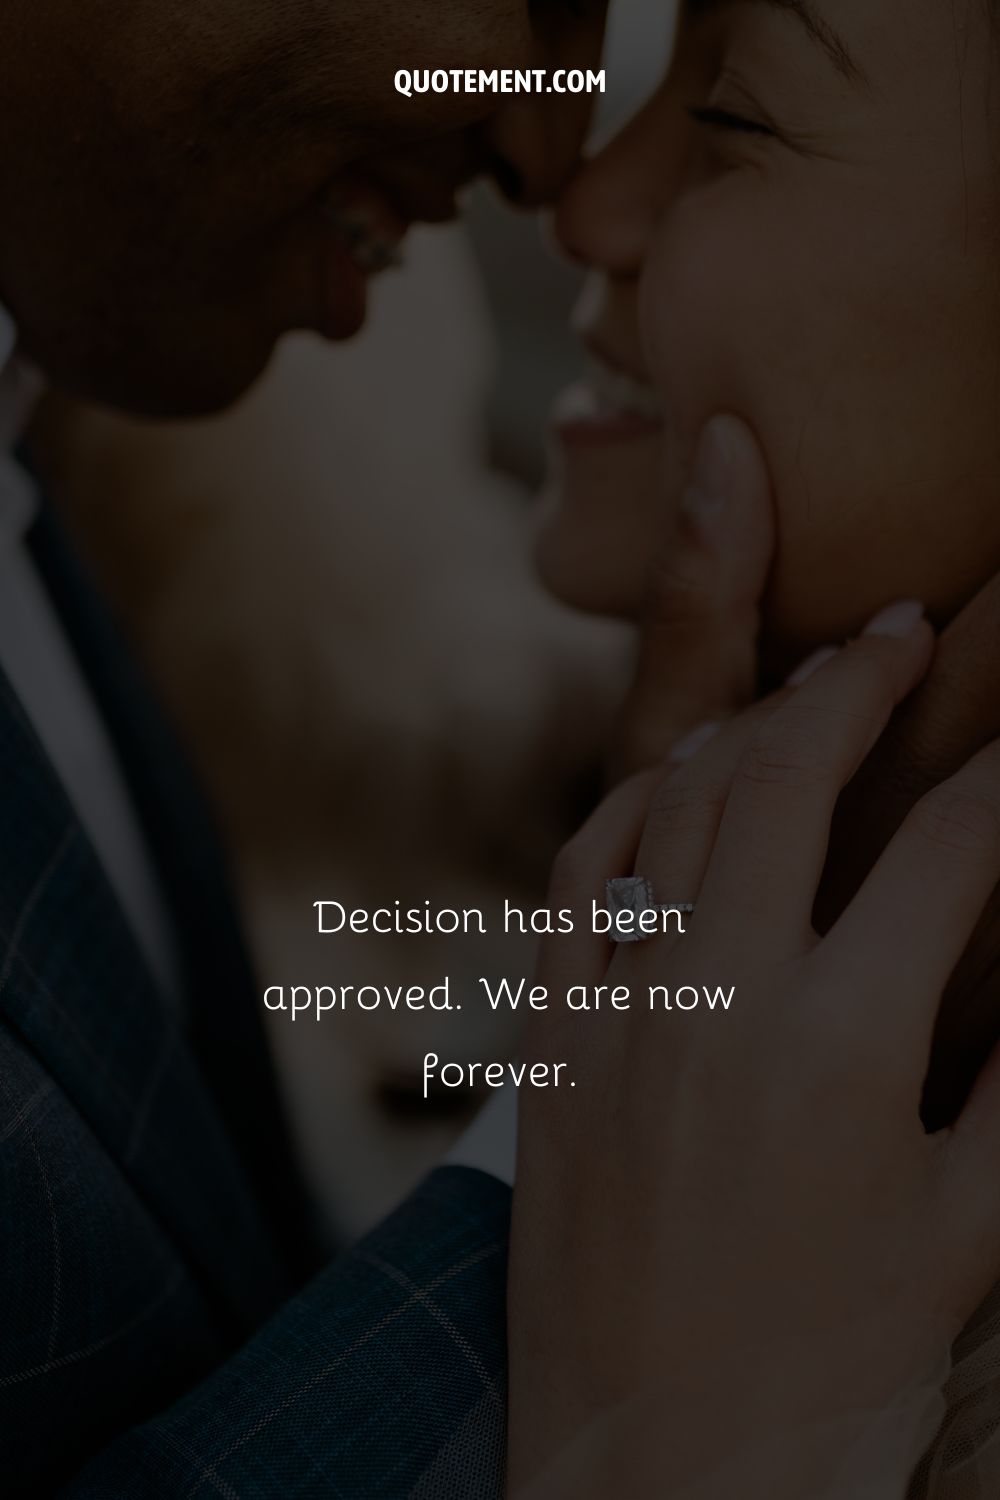 Decision has been approved. We are now forever.